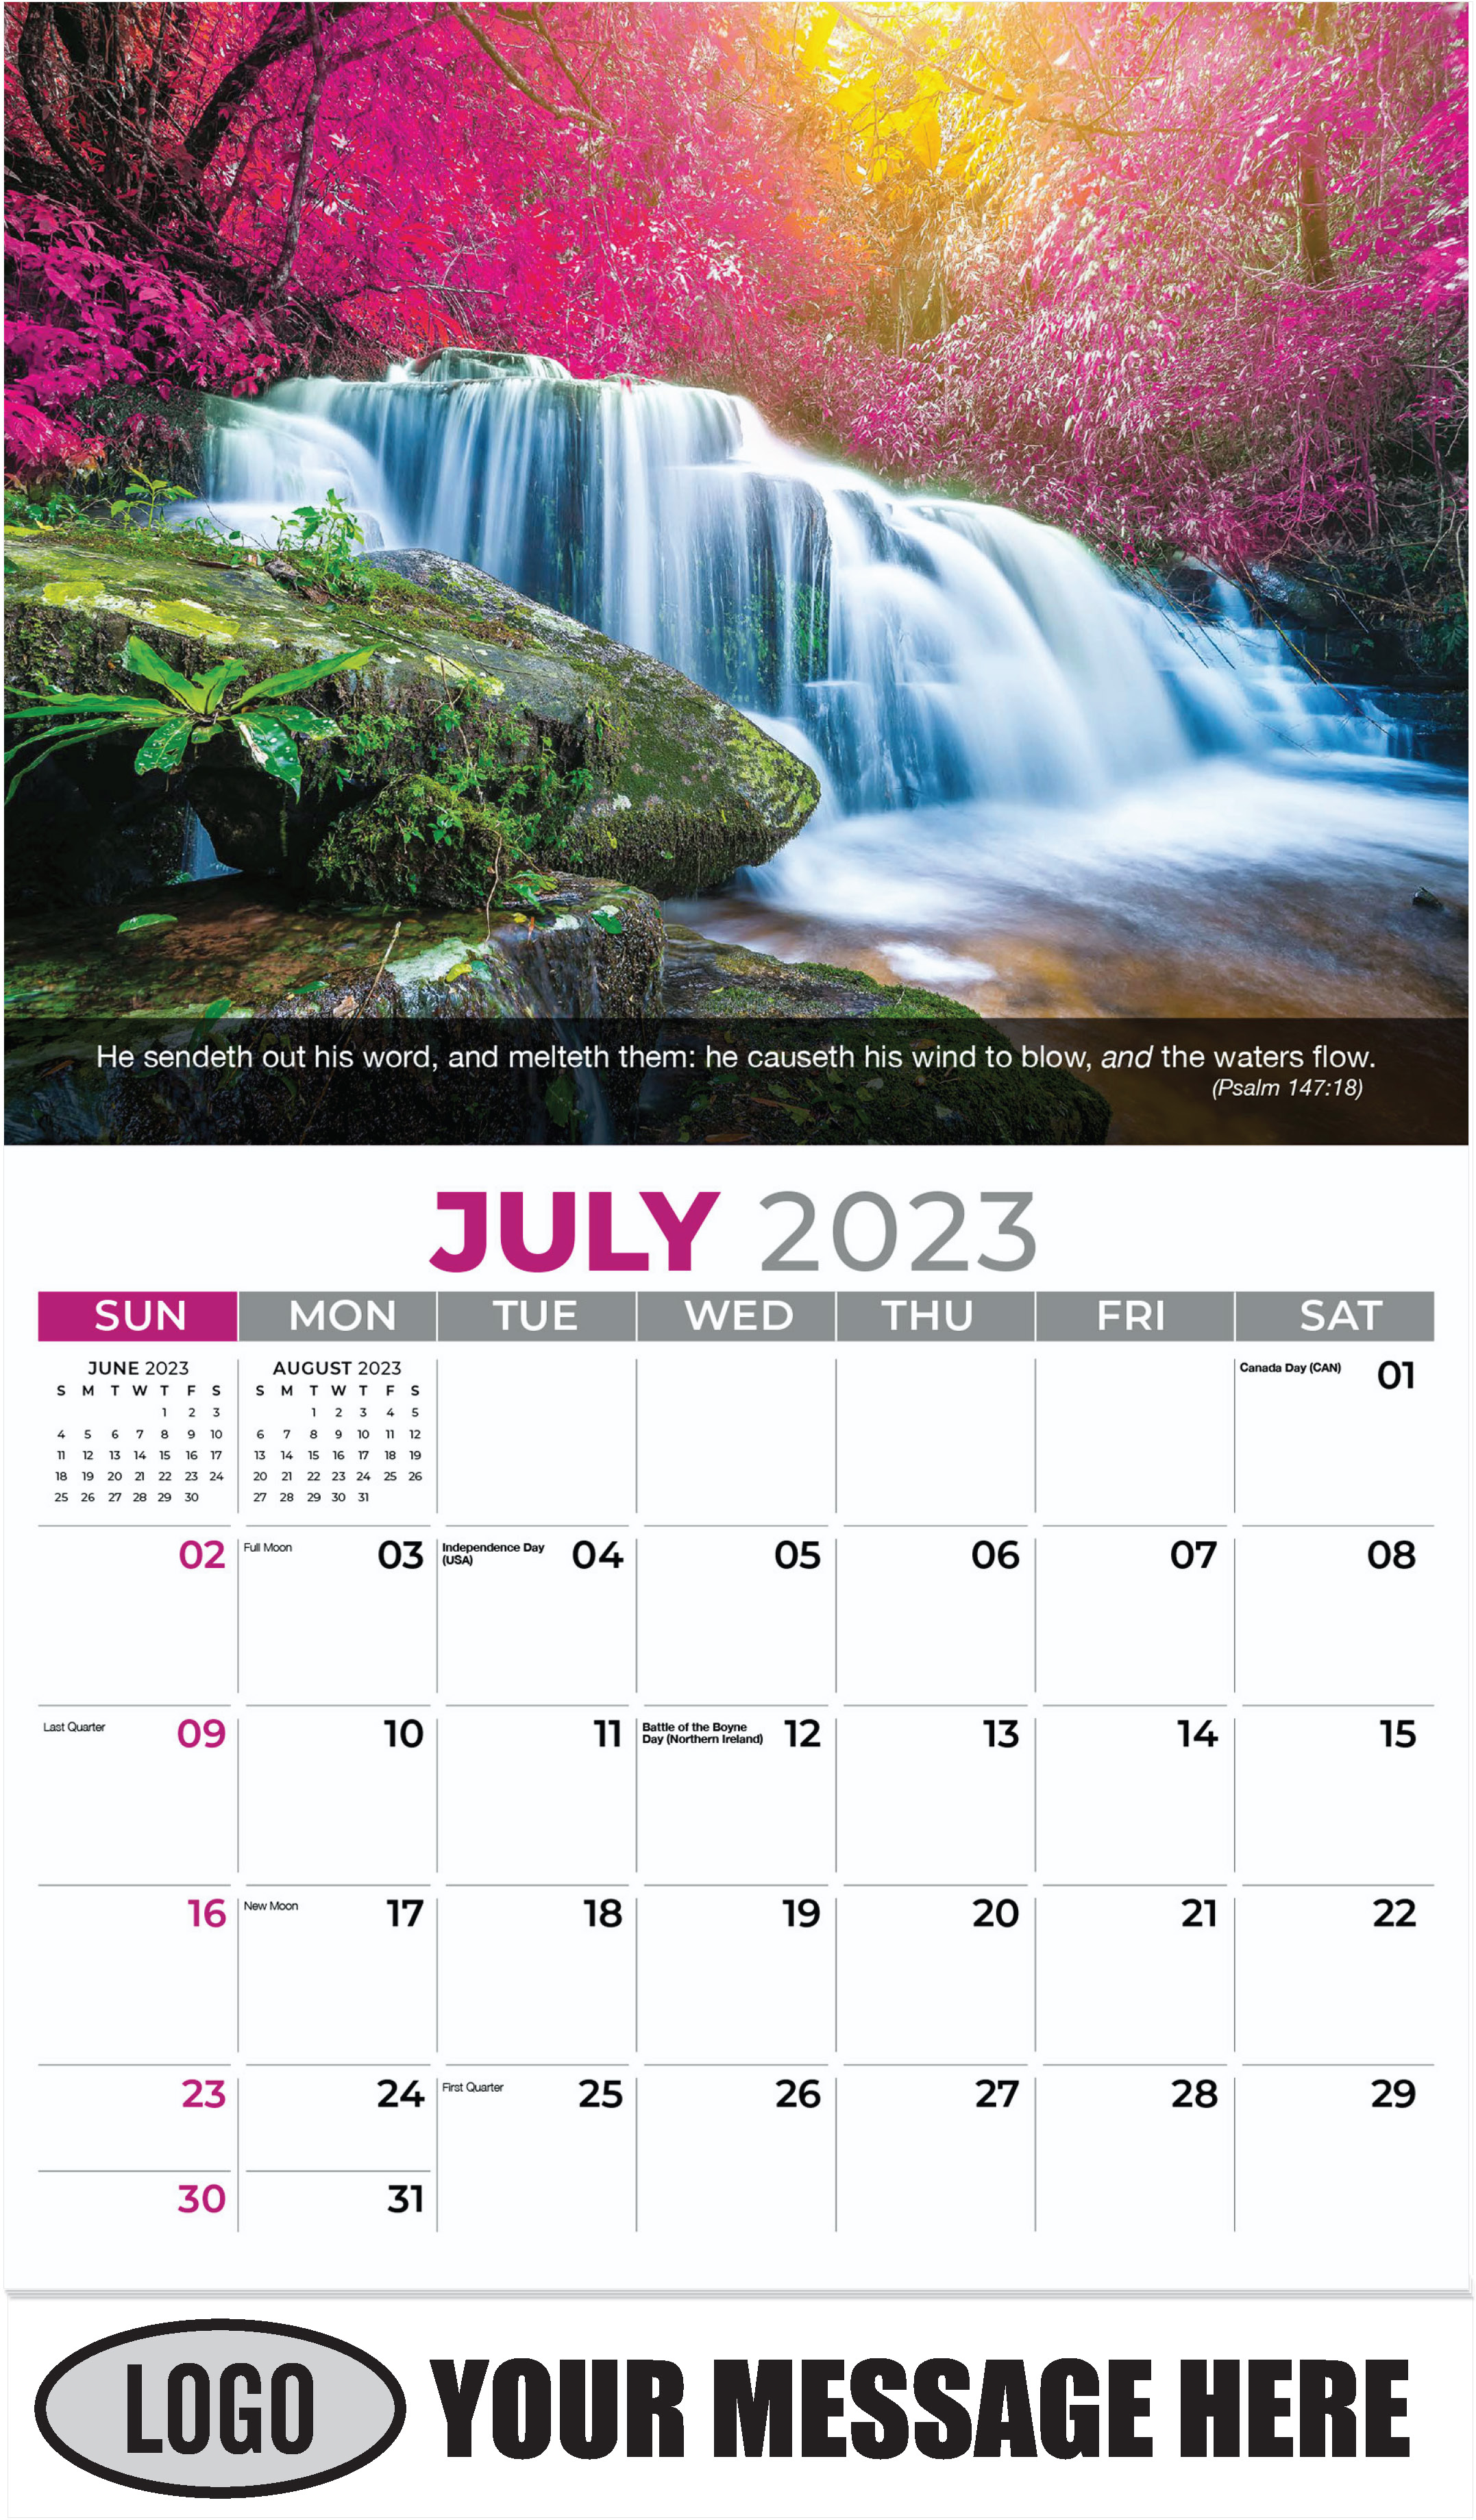 waterfall in colorful autumn forest - July - Faith Passages 2023 Promotional Calendar